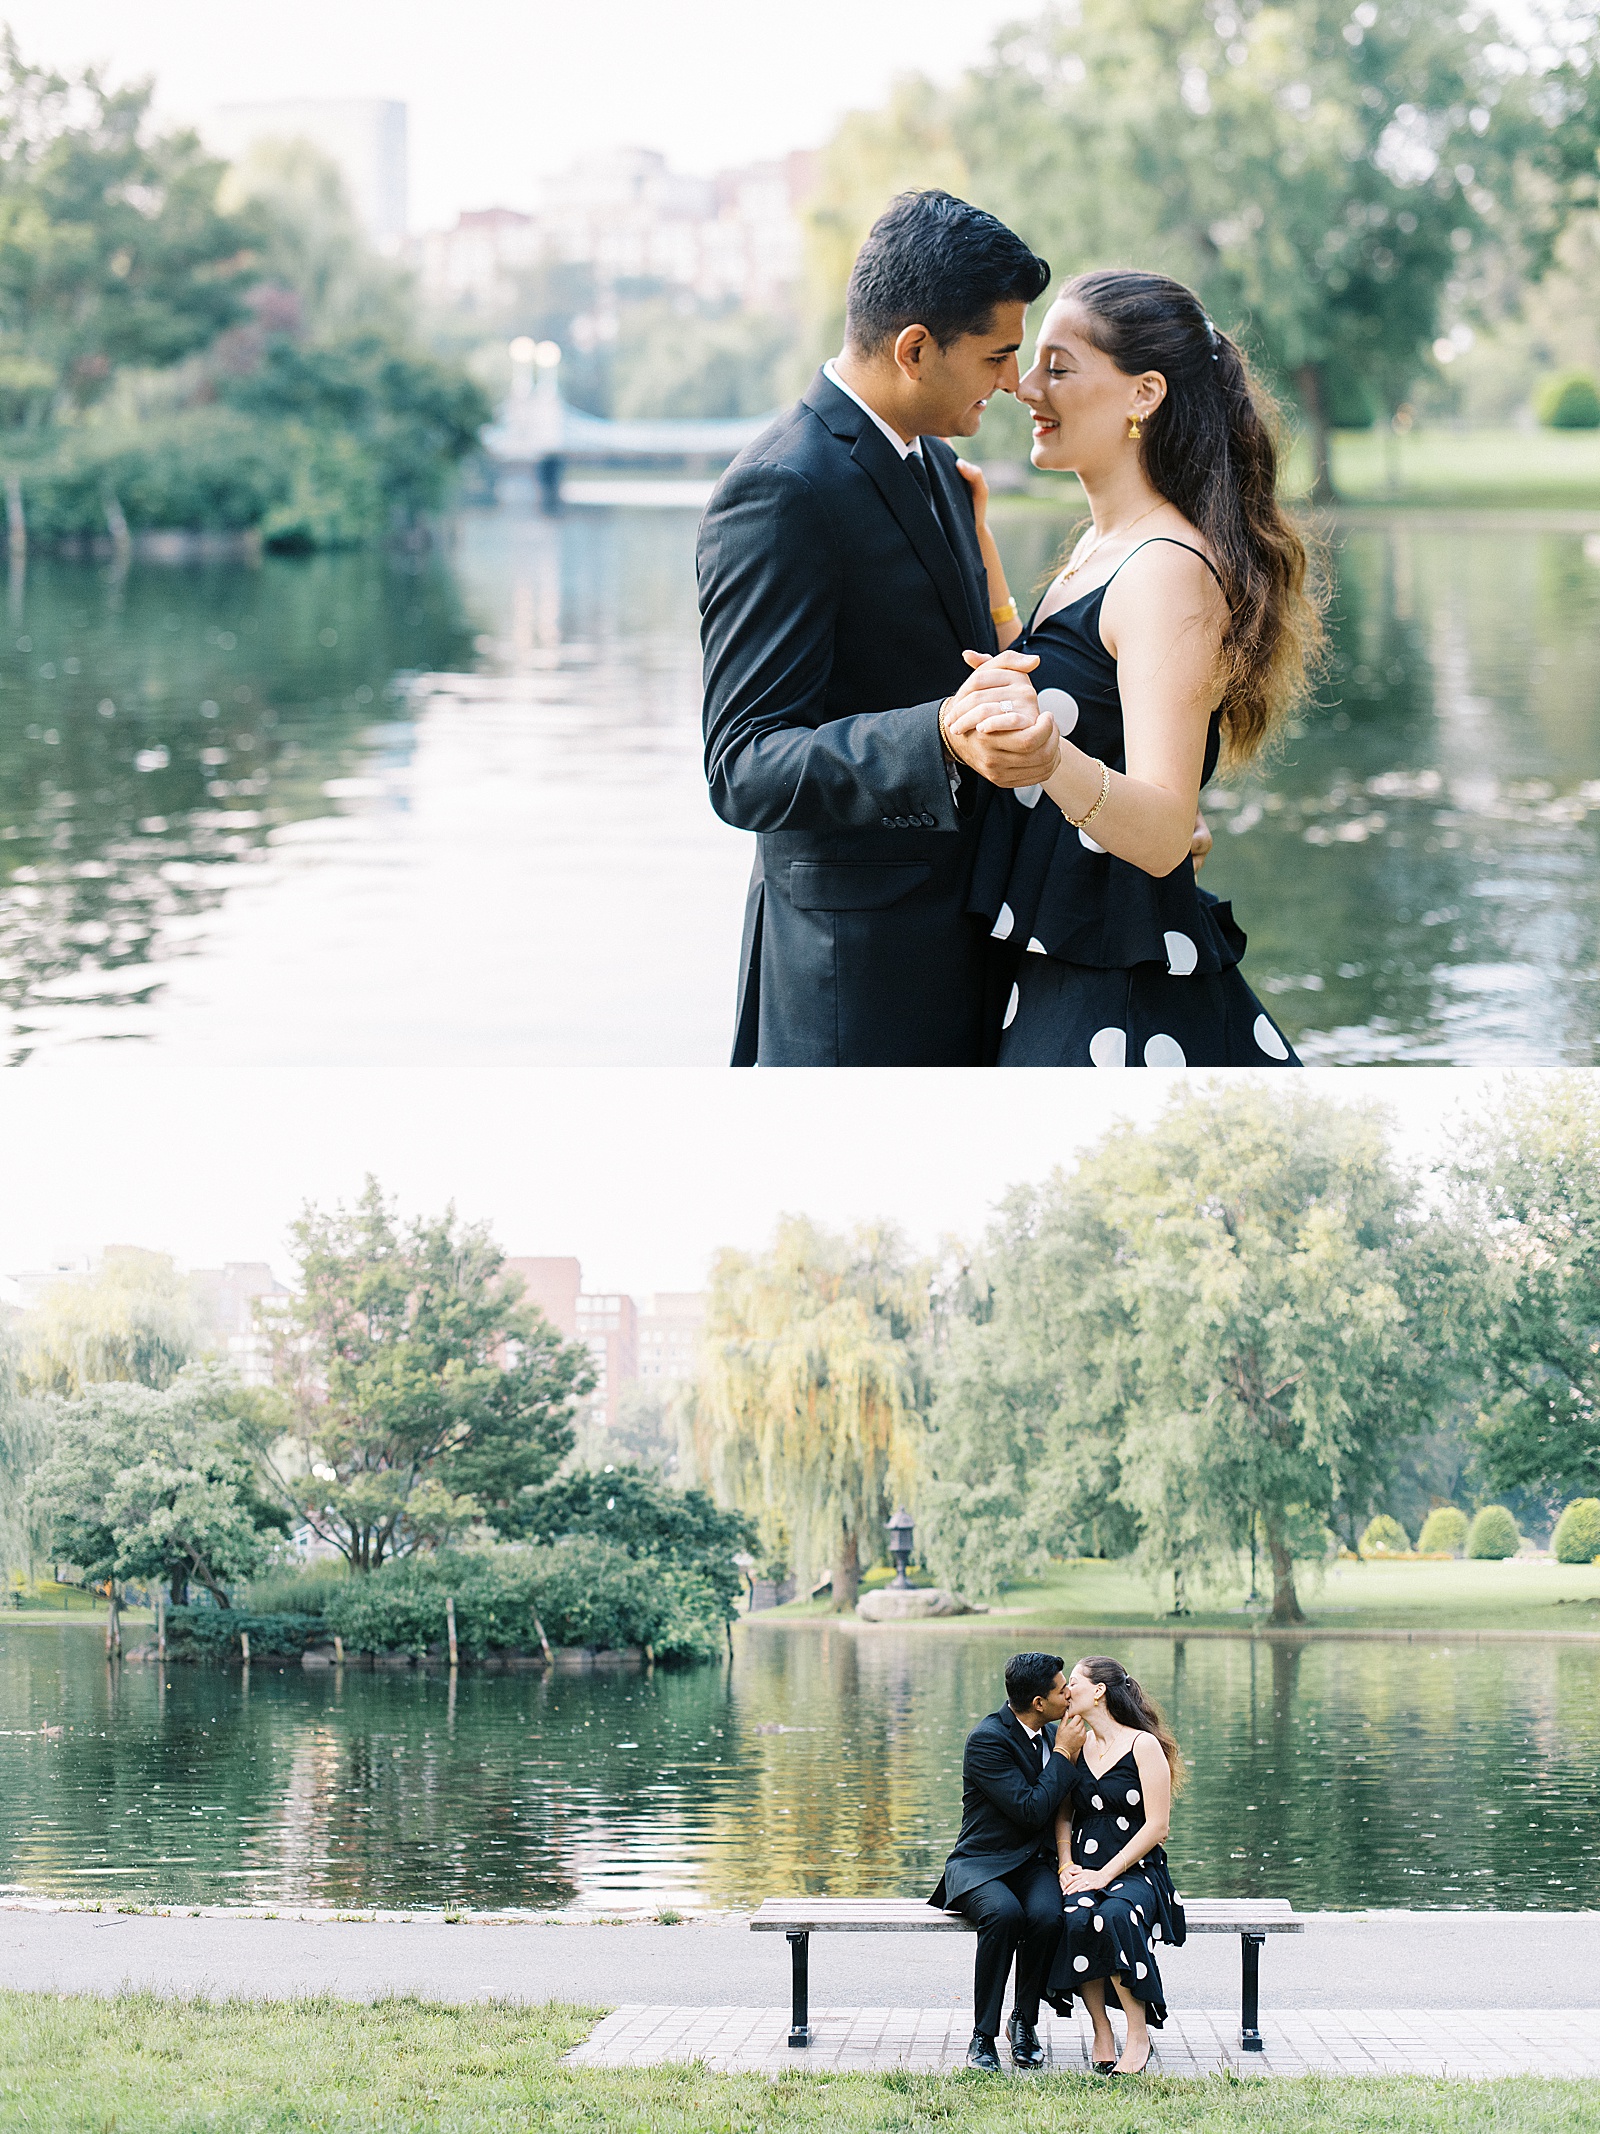 Engaged couple kissing on bench in front of pond by Boston wedding photographer